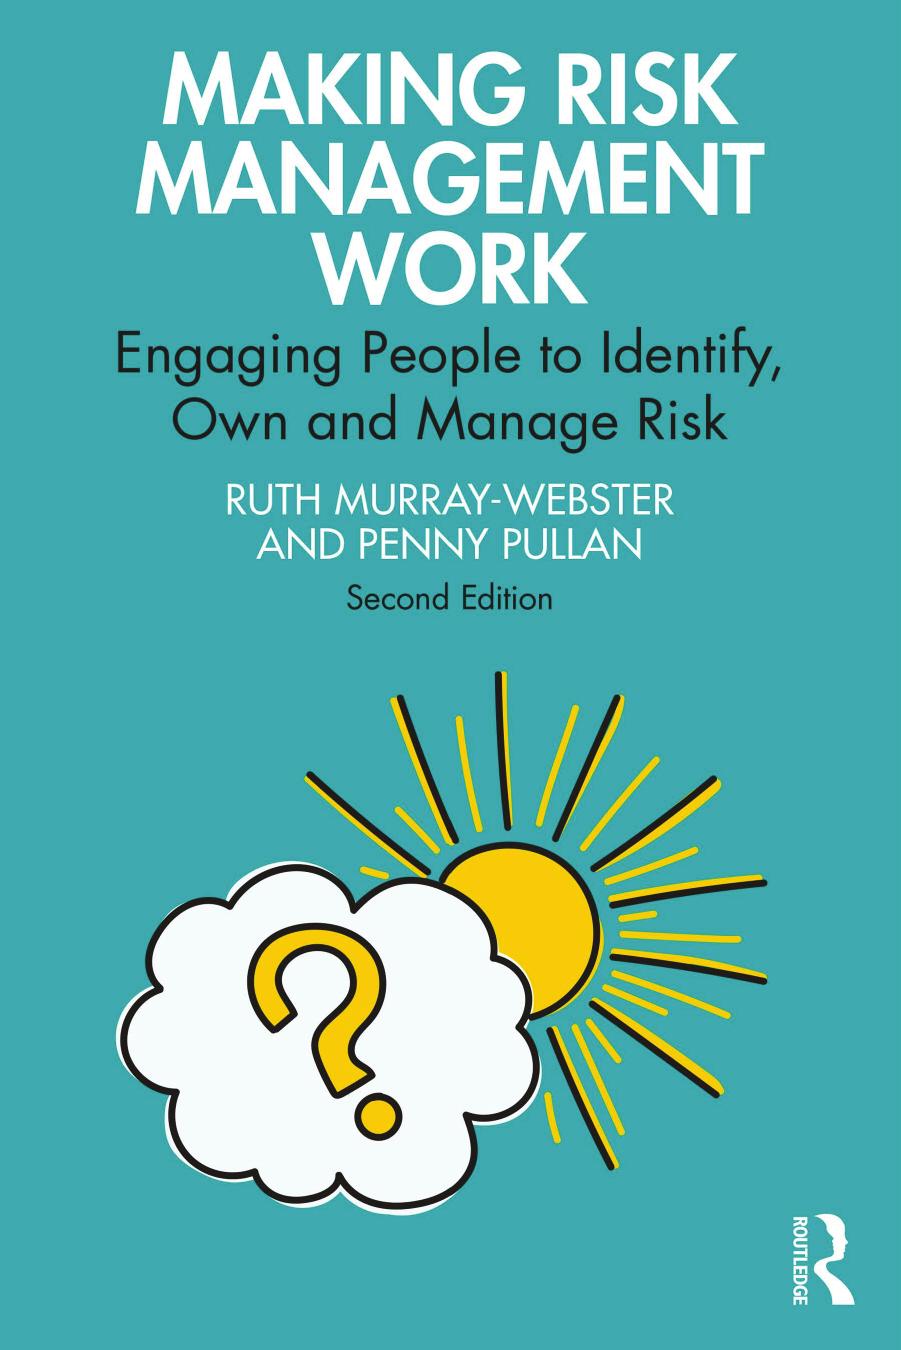 Making Risk Management Work: Engaging People to Identify, Own and Manage Risk by Ruth Murray-Webster Penny Pullan